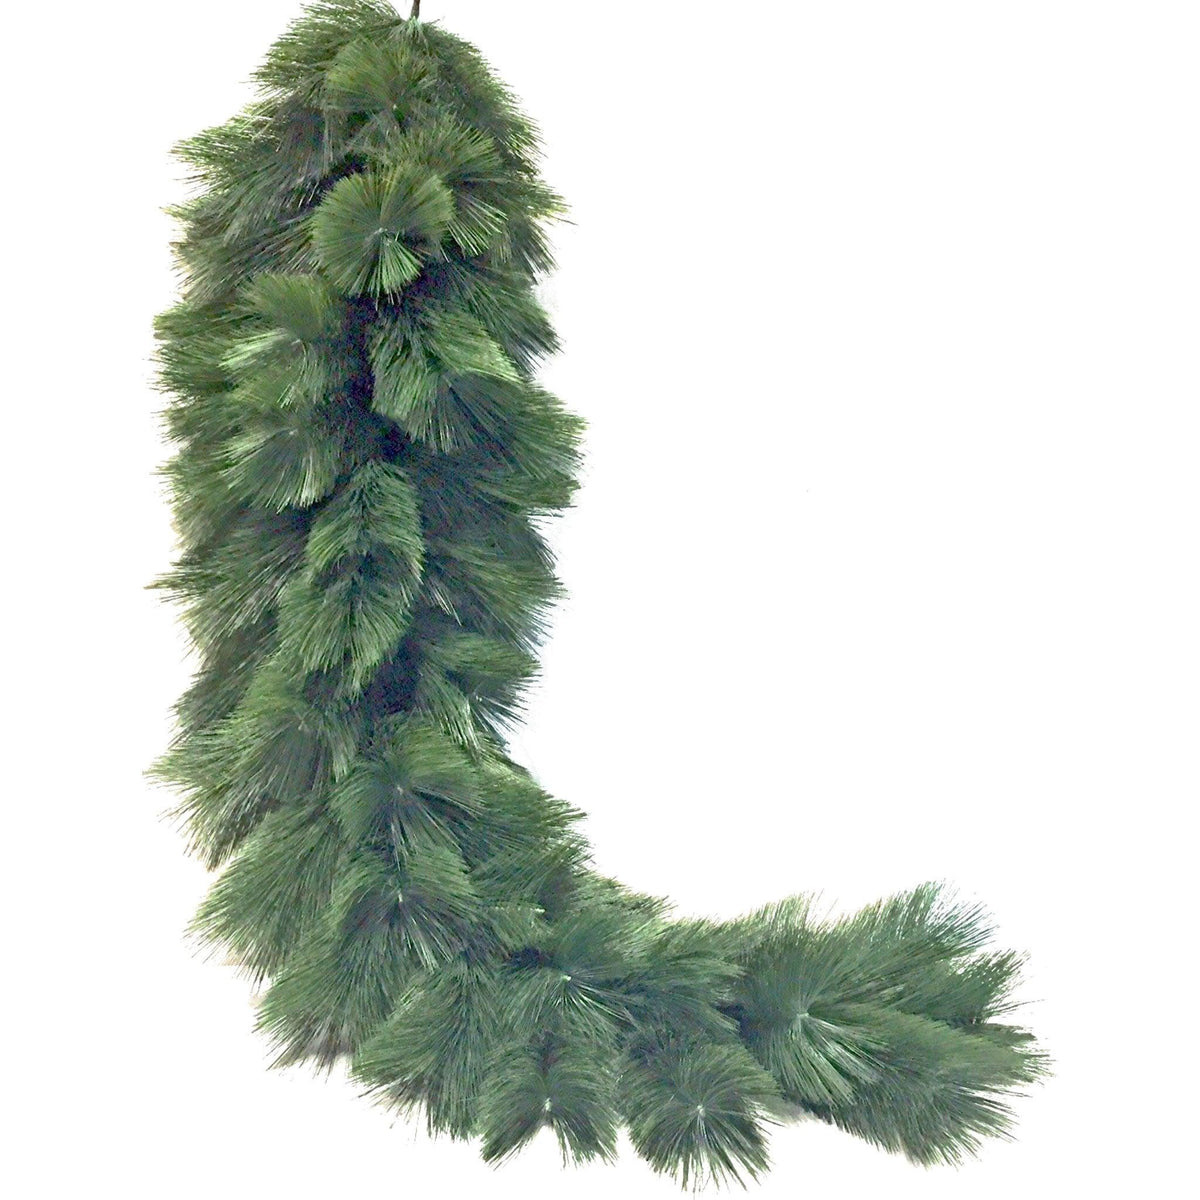 Introducing Lee Display's professional Christmas Garland Deluxe with Green Pine Needle Brush.  Comes in 6FT Lengths with options for Pre-Lit.  Shop now with Lee Display